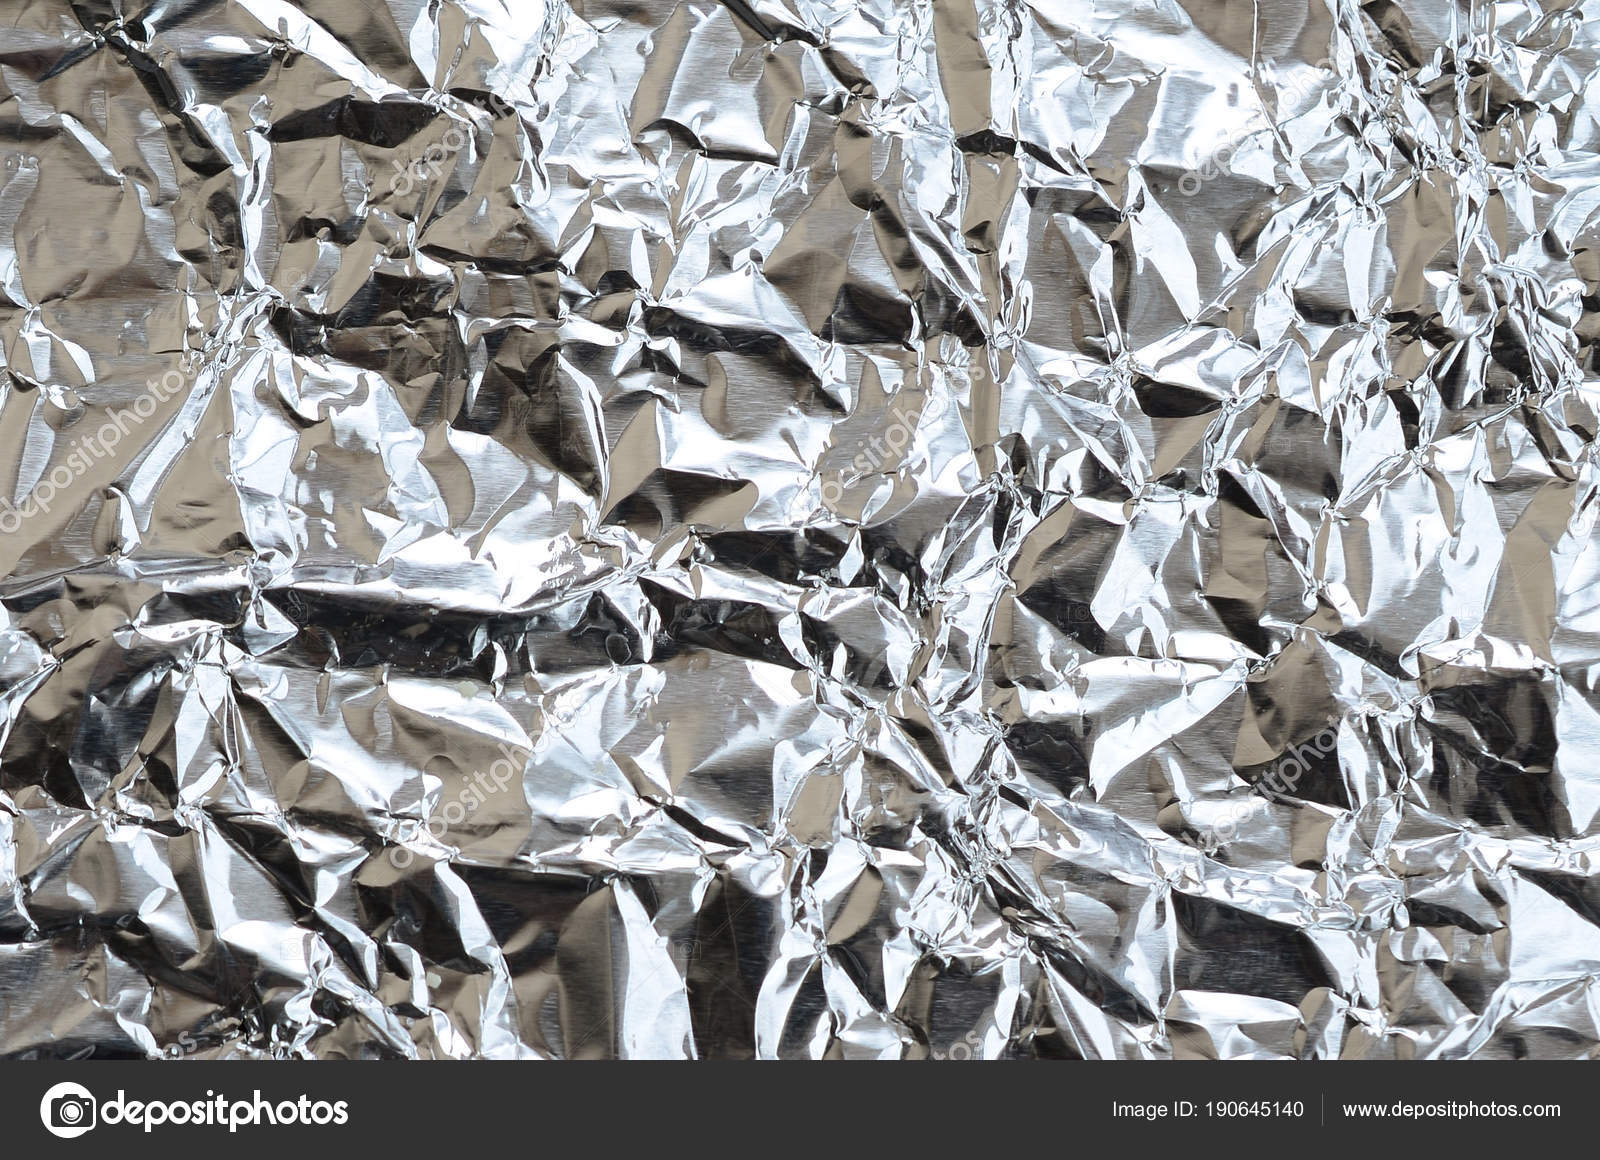 Silver foil background Stock Photos, Royalty Free Silver foil background  Images | Depositphotos